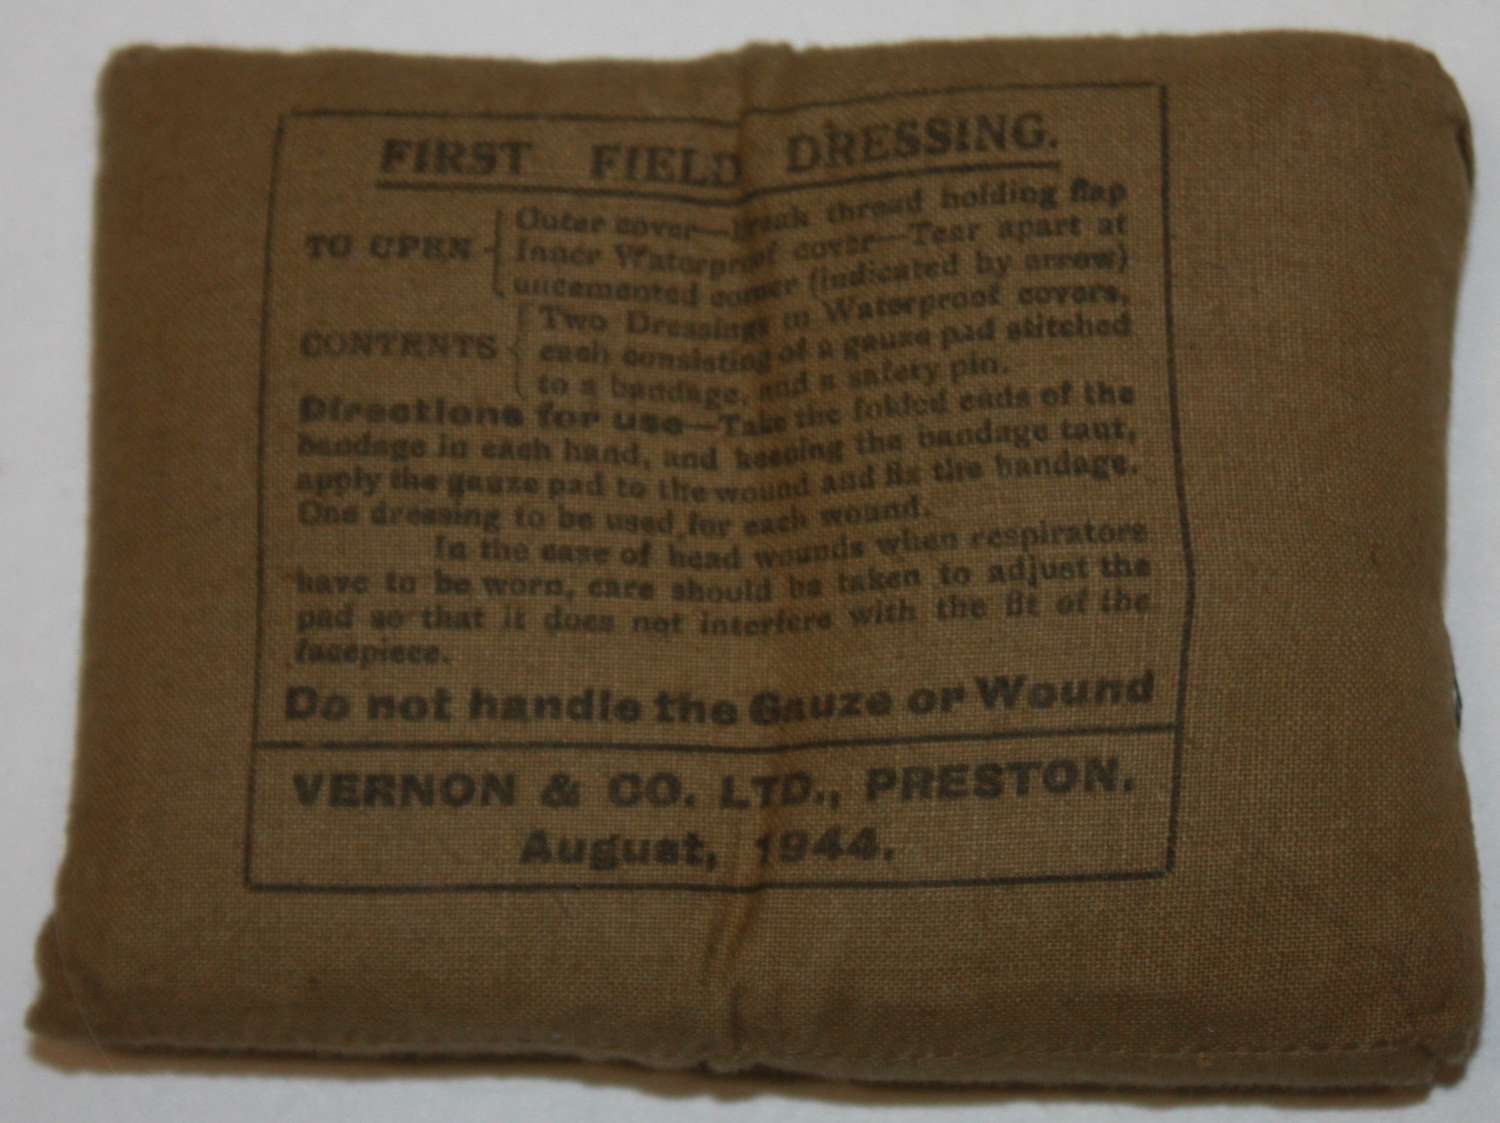 A 1944 DATED 1ST FIELD DRESSING